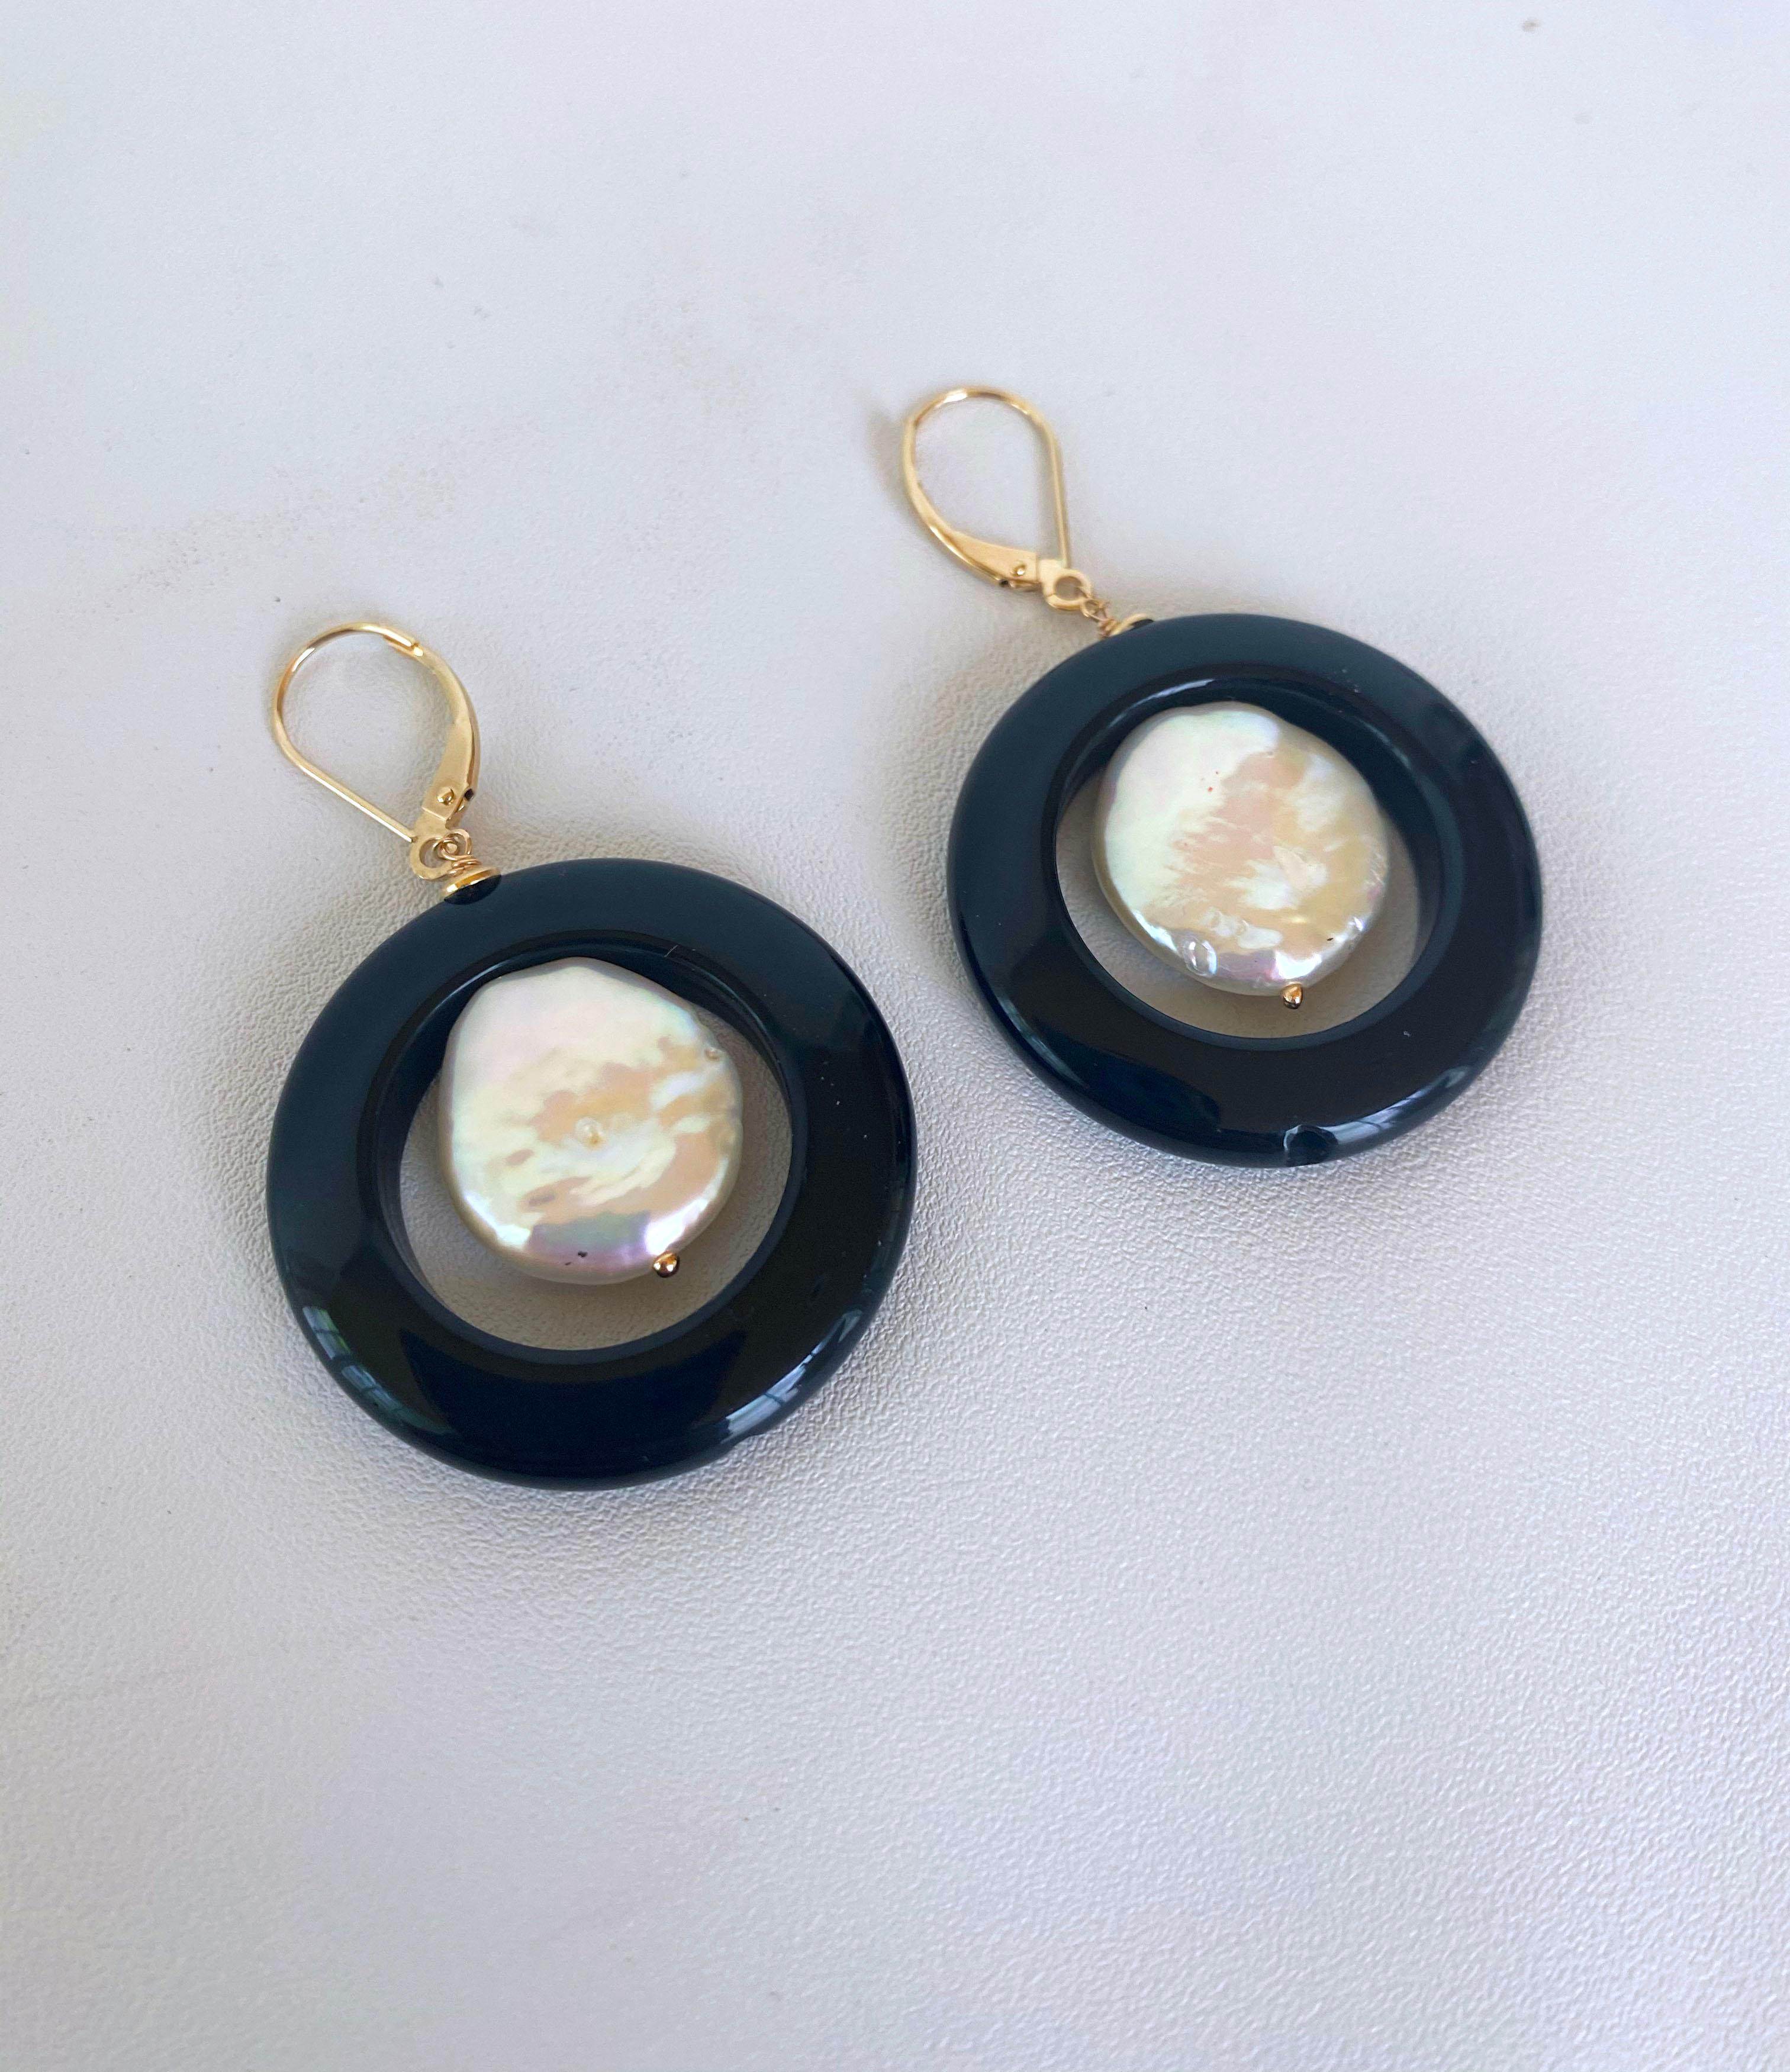 Bold and simple Black Onyx earrings with a high luster gorgeous coin Pearl dangling within. These earrings have a very simple yet powerful way of elevating any outfit and are a perfect addition to any formal evening wear. These earrings measure to 2